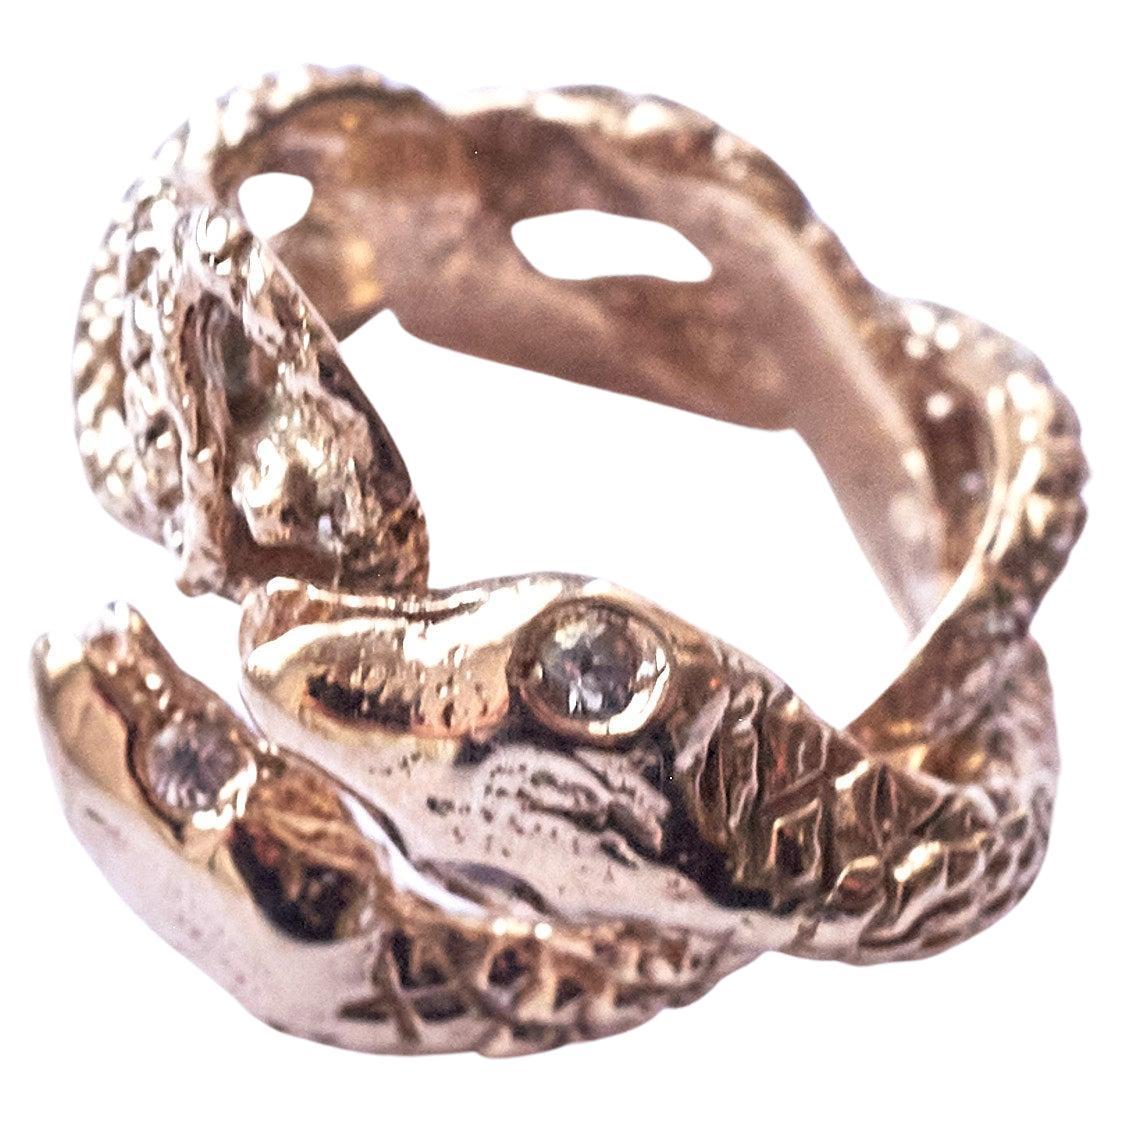 Contemporary Animal jewelry Aquamarine Snake Ring Bronze Cocktail Ring J Dauphin For Sale